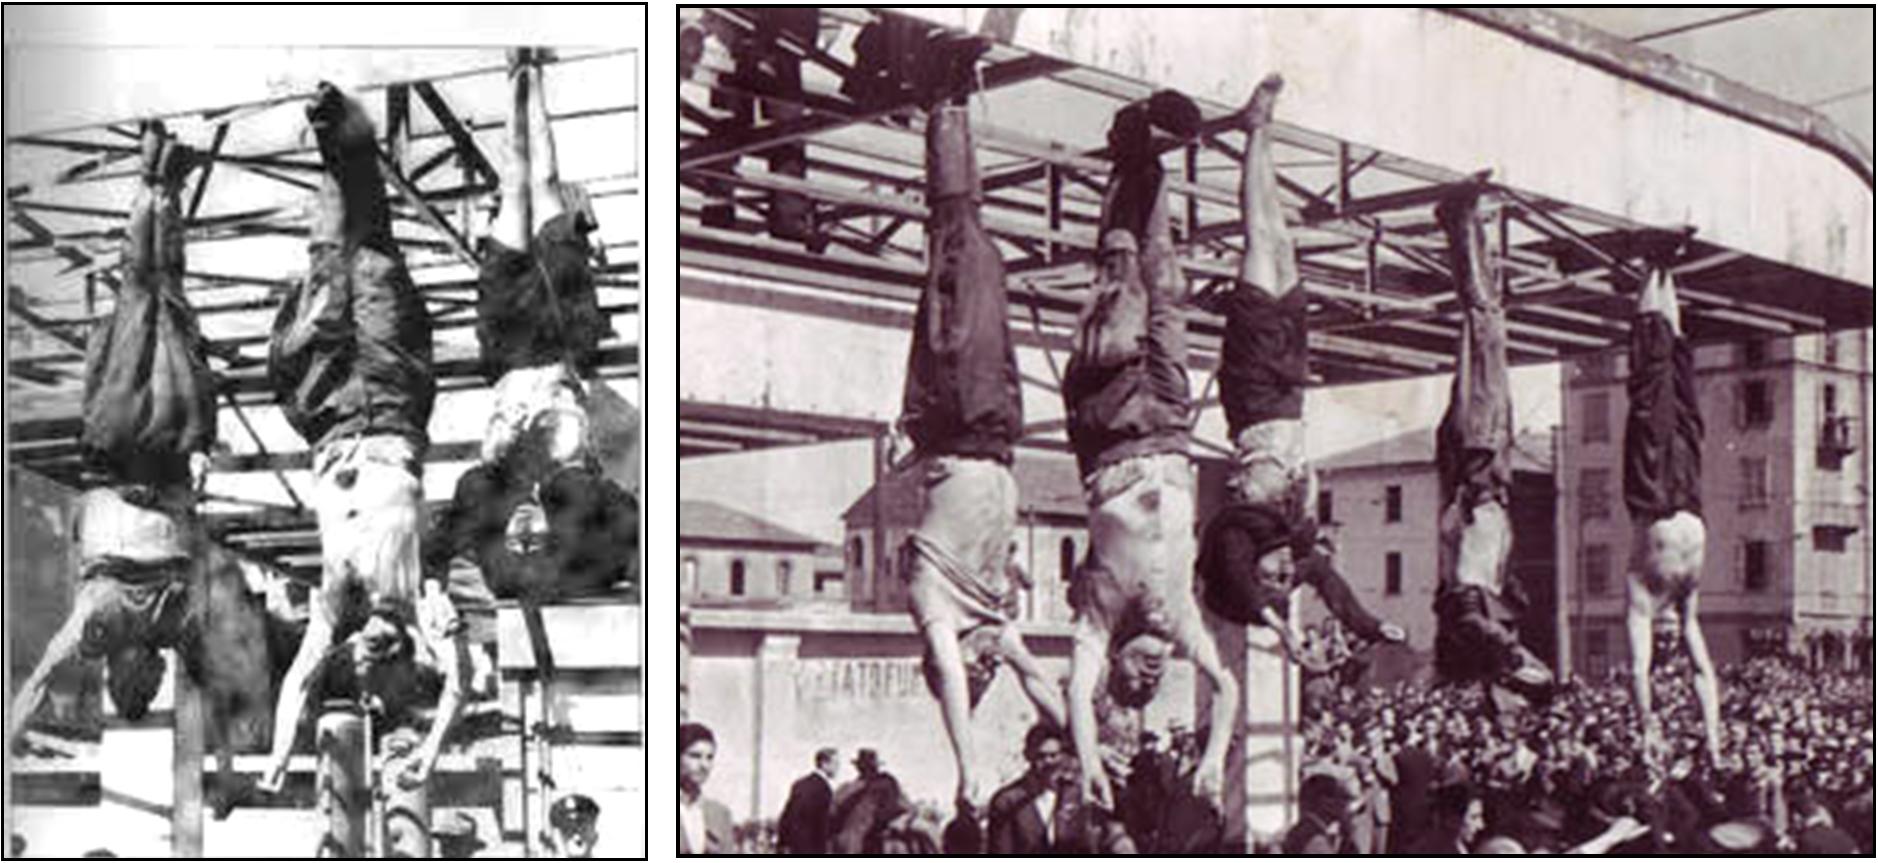 THE FALL OF FASCISM. A demonic display of Italy's anger towards Mussolini's treason 1943-44. IL DUCE, his girlfriend, and 15 others were hung upside down in Milan 29 April 1945. Victor and Andre were witnesses (see 